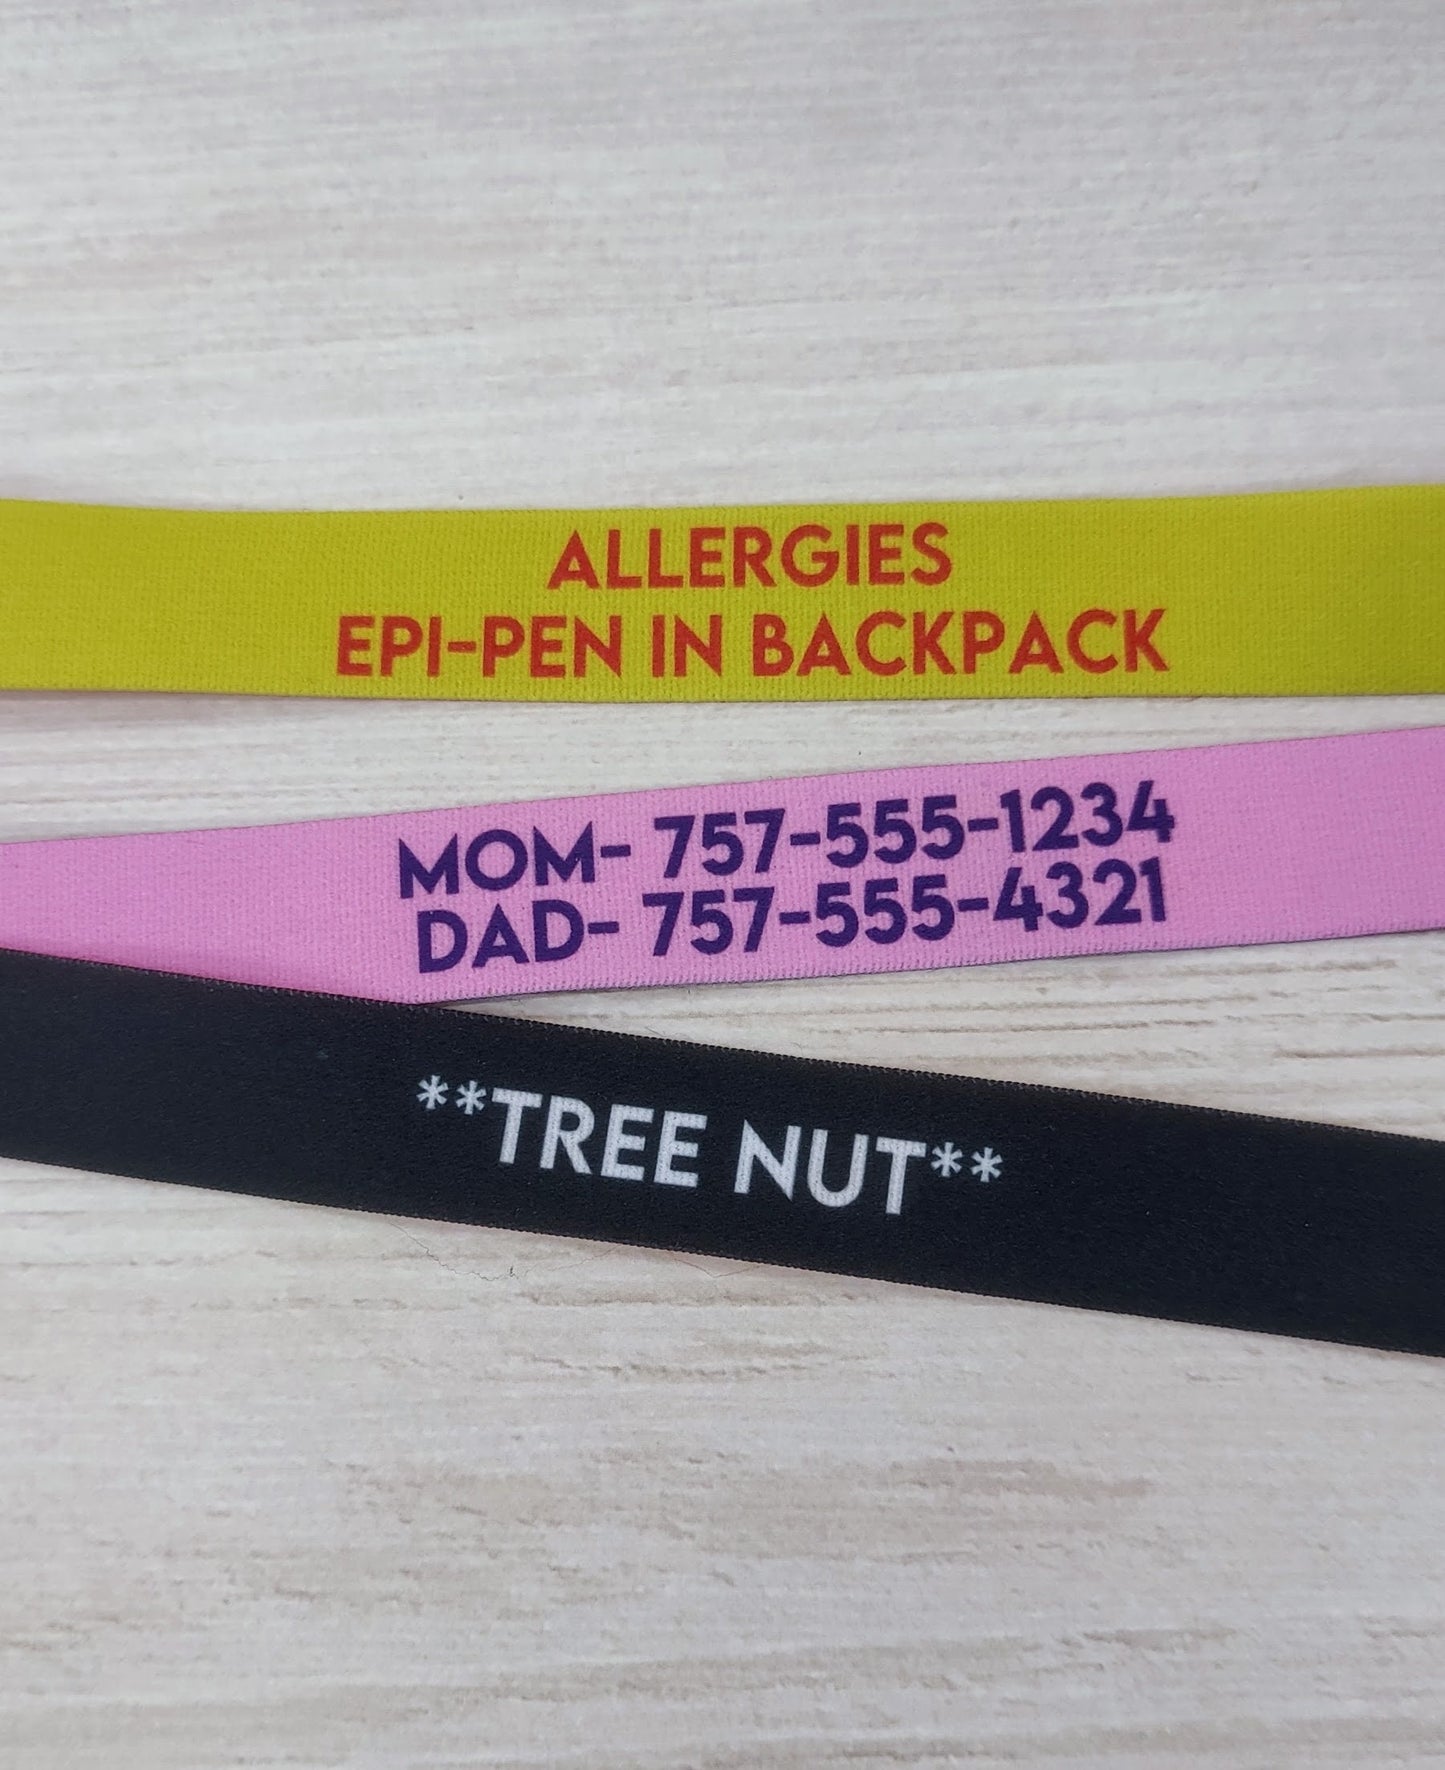 Allergy Alert - Thick Elastic Wristband Bracelet - stretchy elastic with magnetic clasp - heavy duty, design does not fade, washable 7/8"